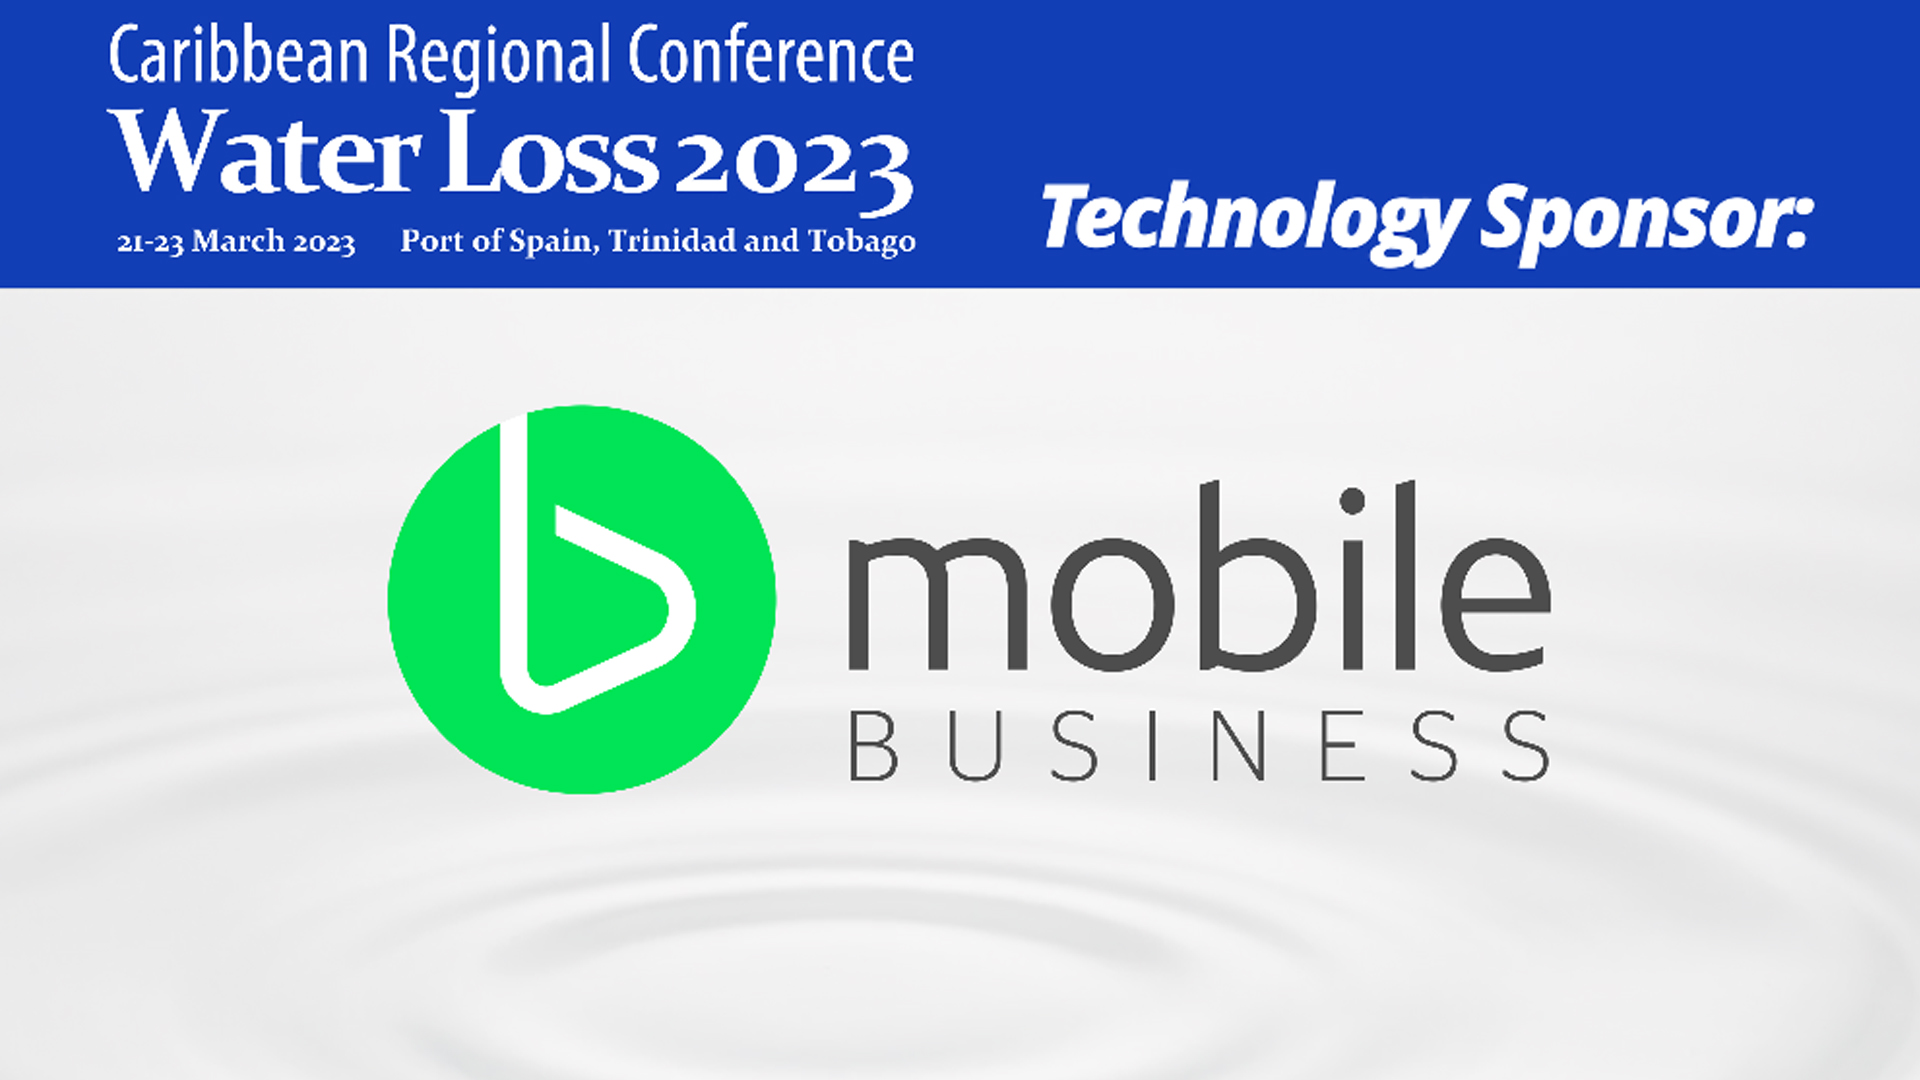 bMobile is the technology sponsor of the Caribbean Regional Water Loss Conference 2023